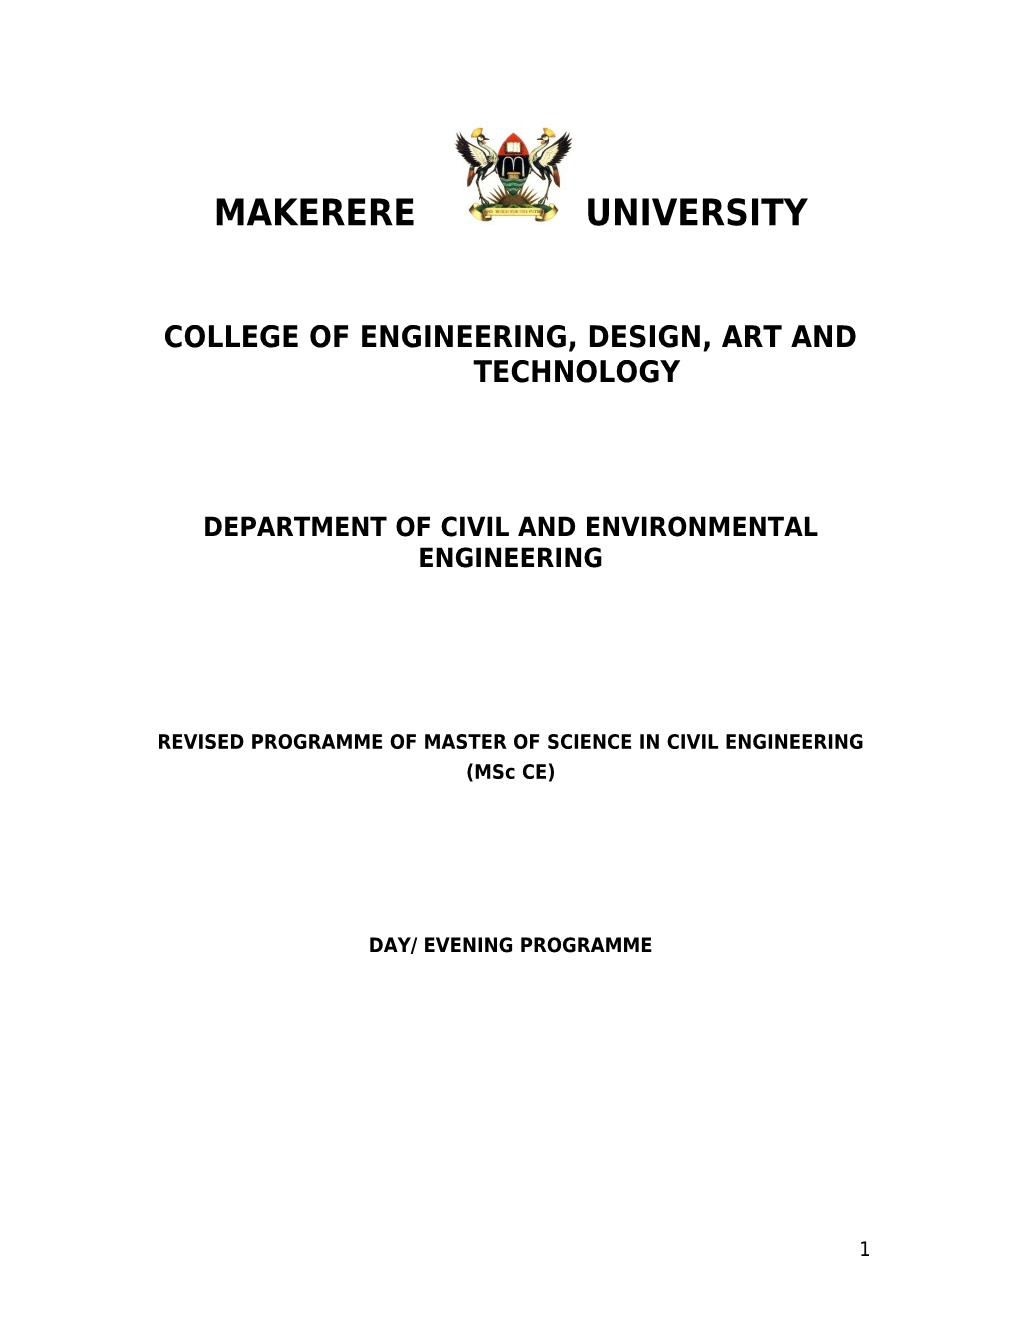 College of Engineering, Design, Art and Technology